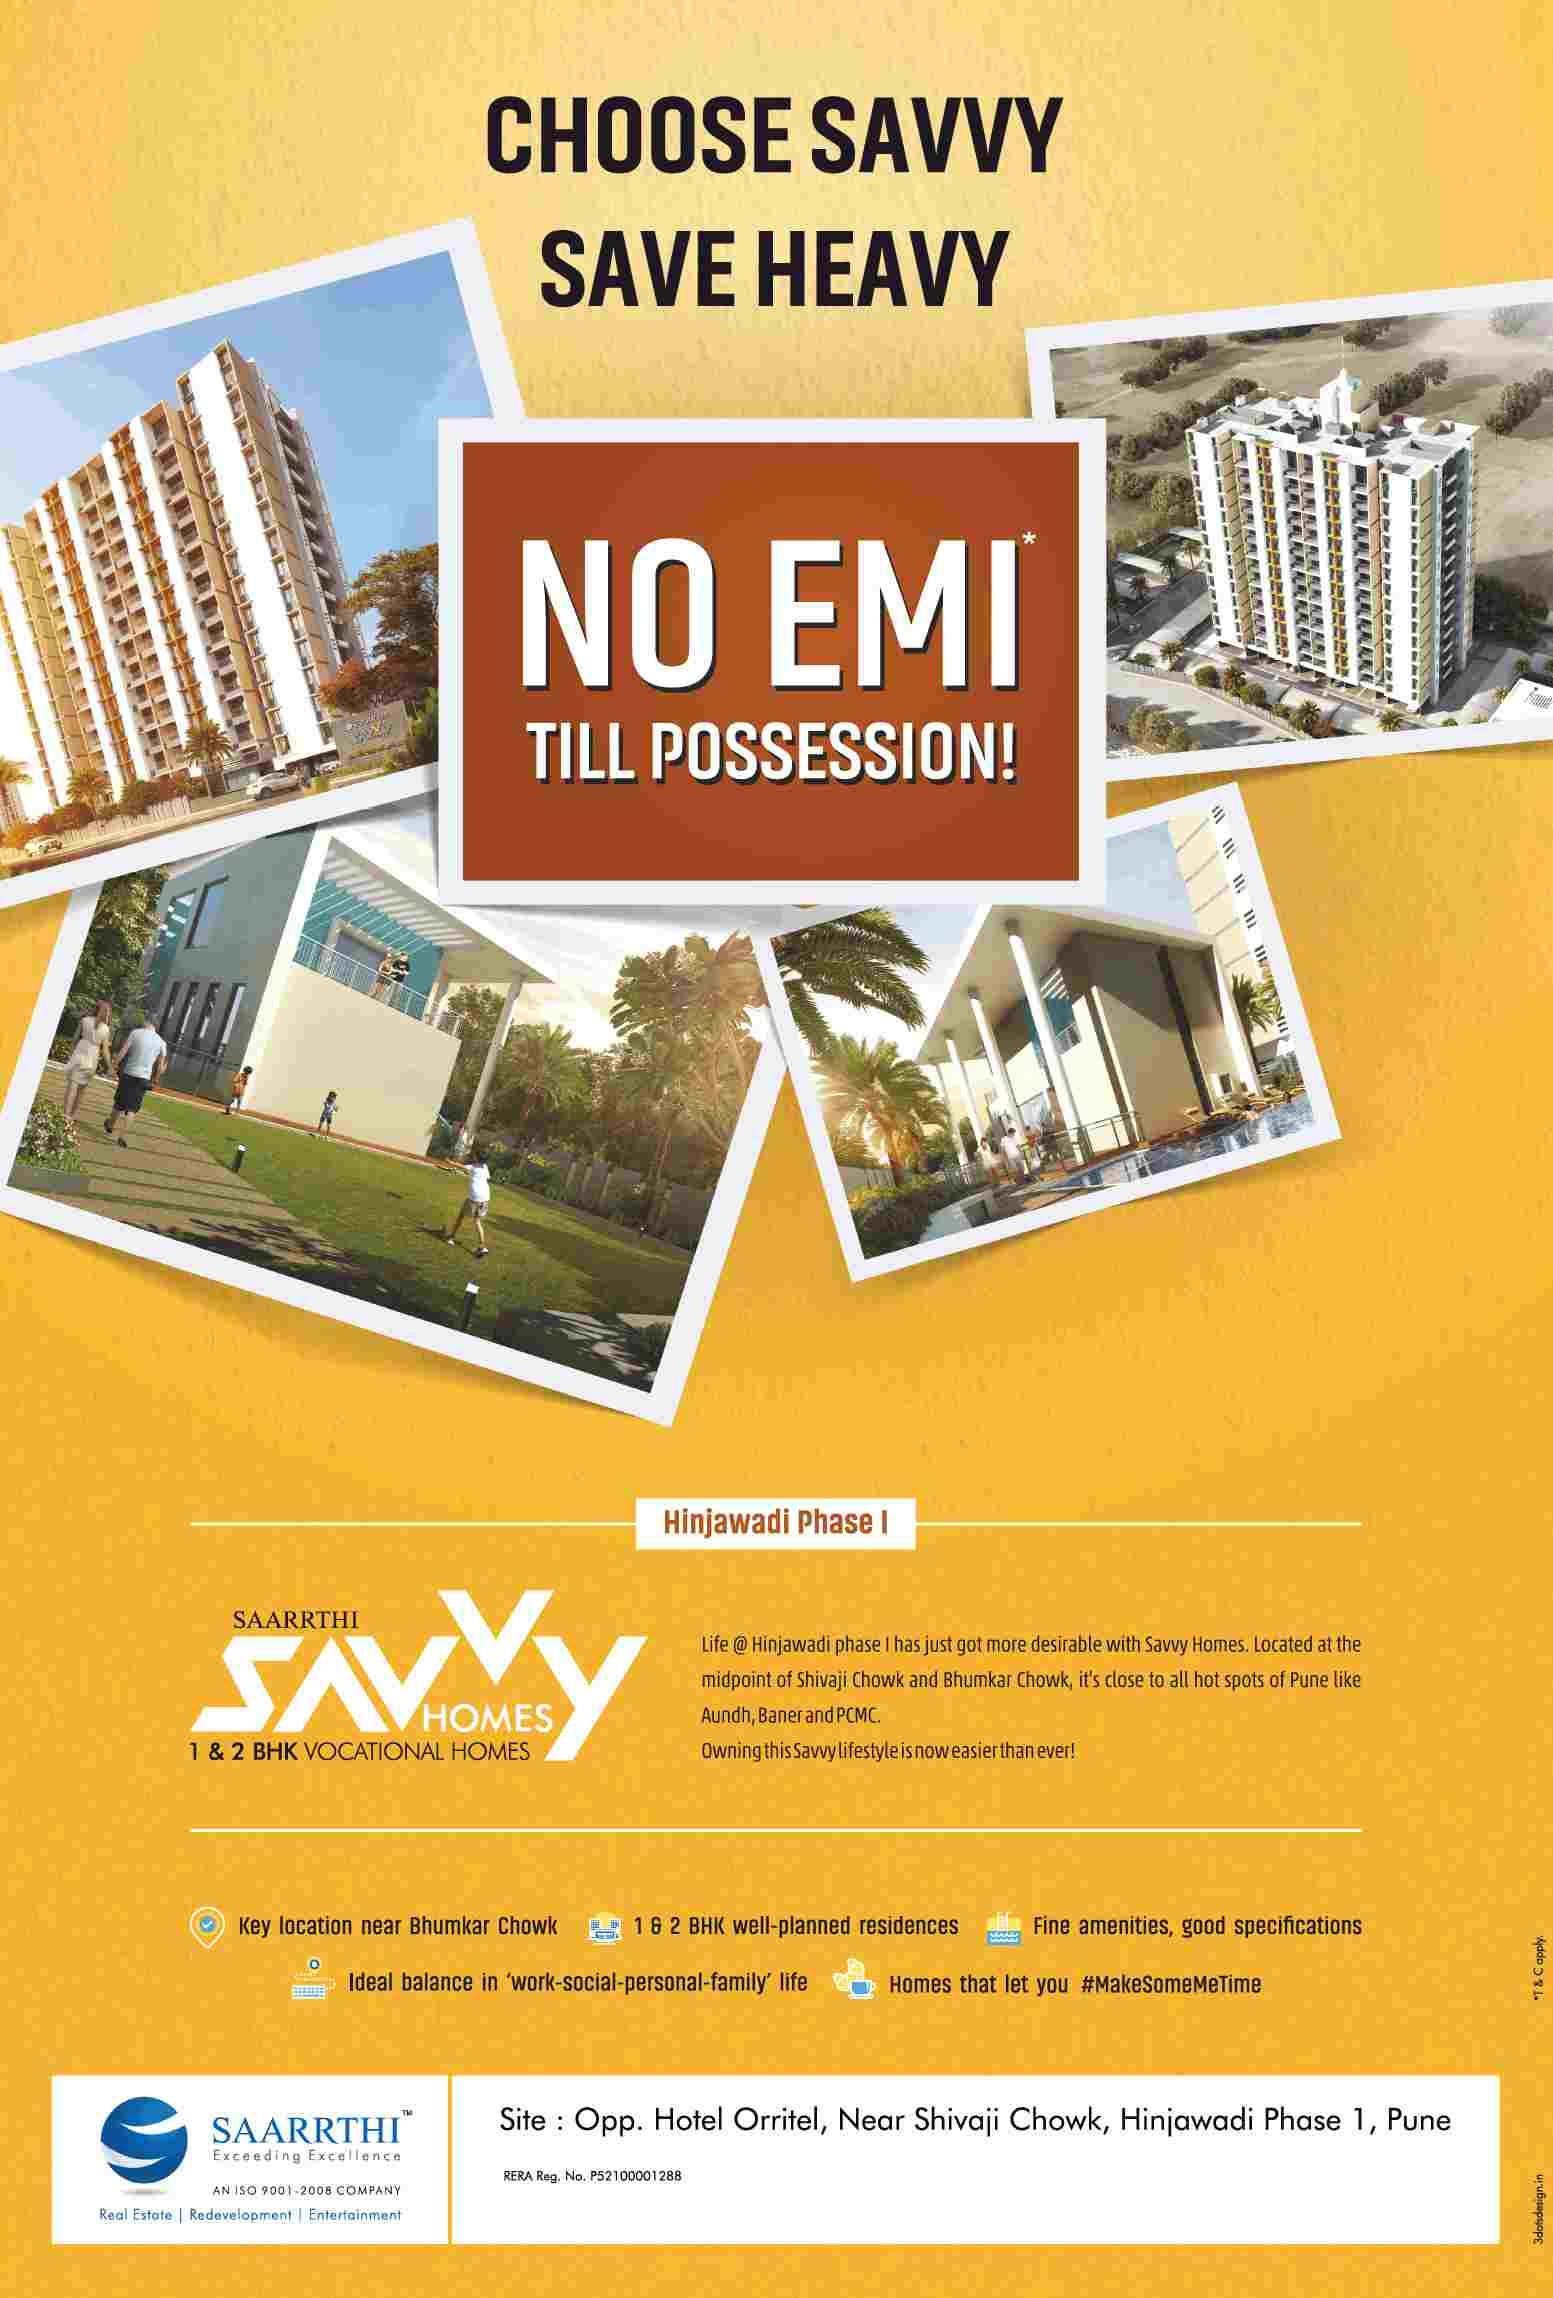 Book vocational homes with no EMI till possession at Saarrthi Savvy Home in Pune Update